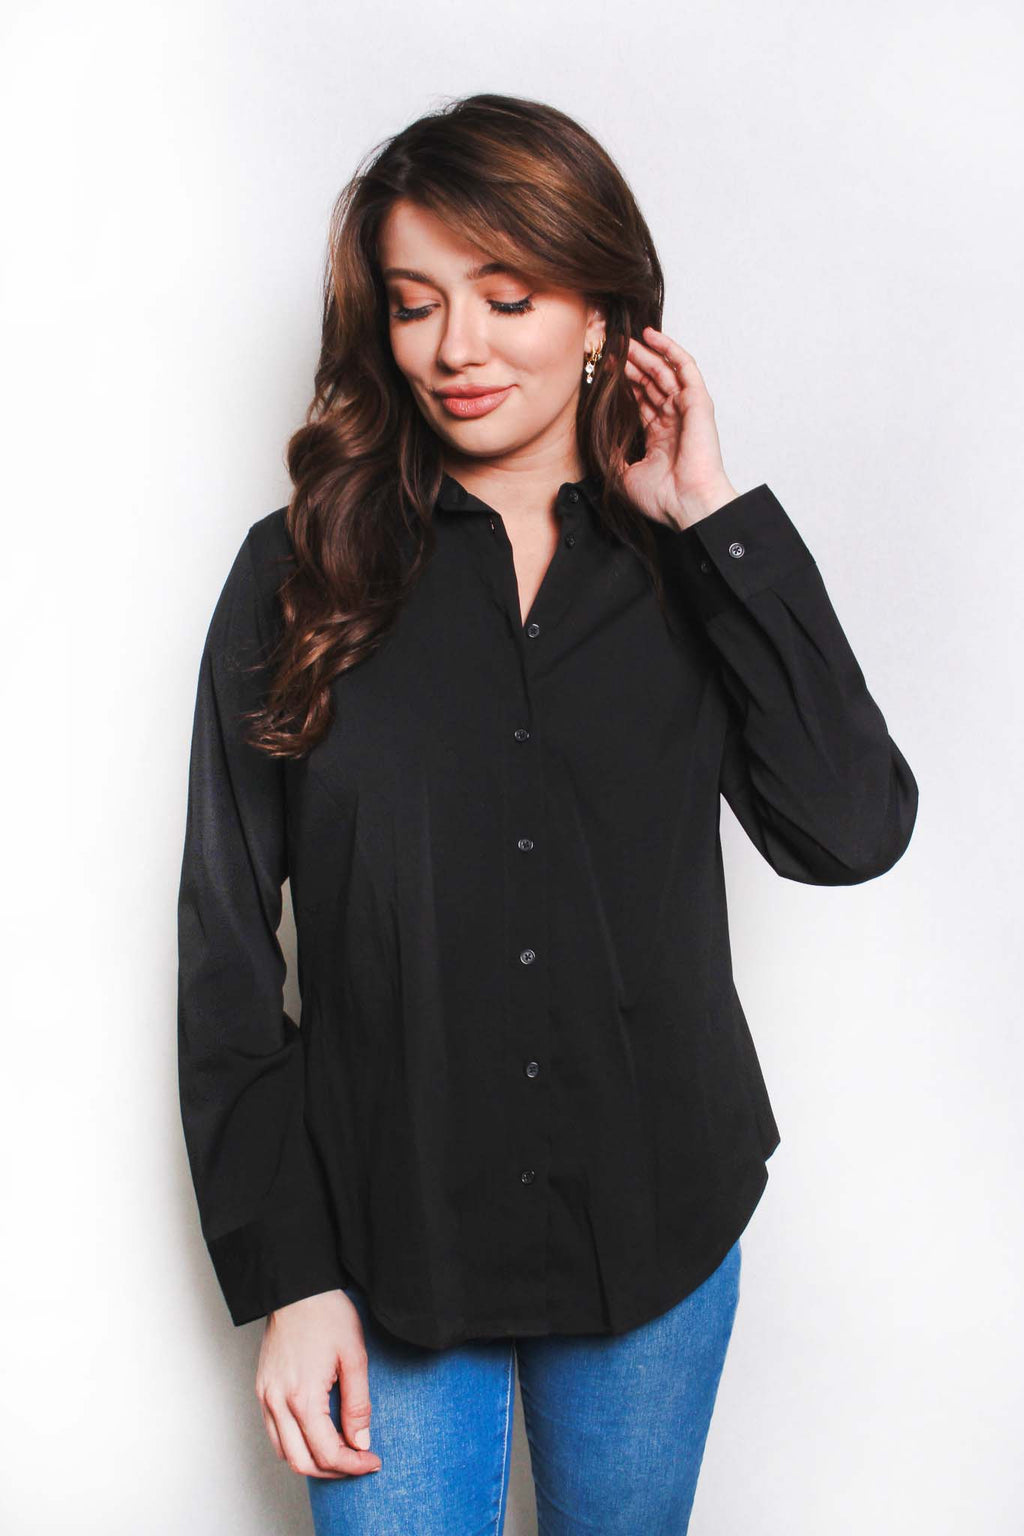 Women's Long Sleeve Button Down Collared Solid Top